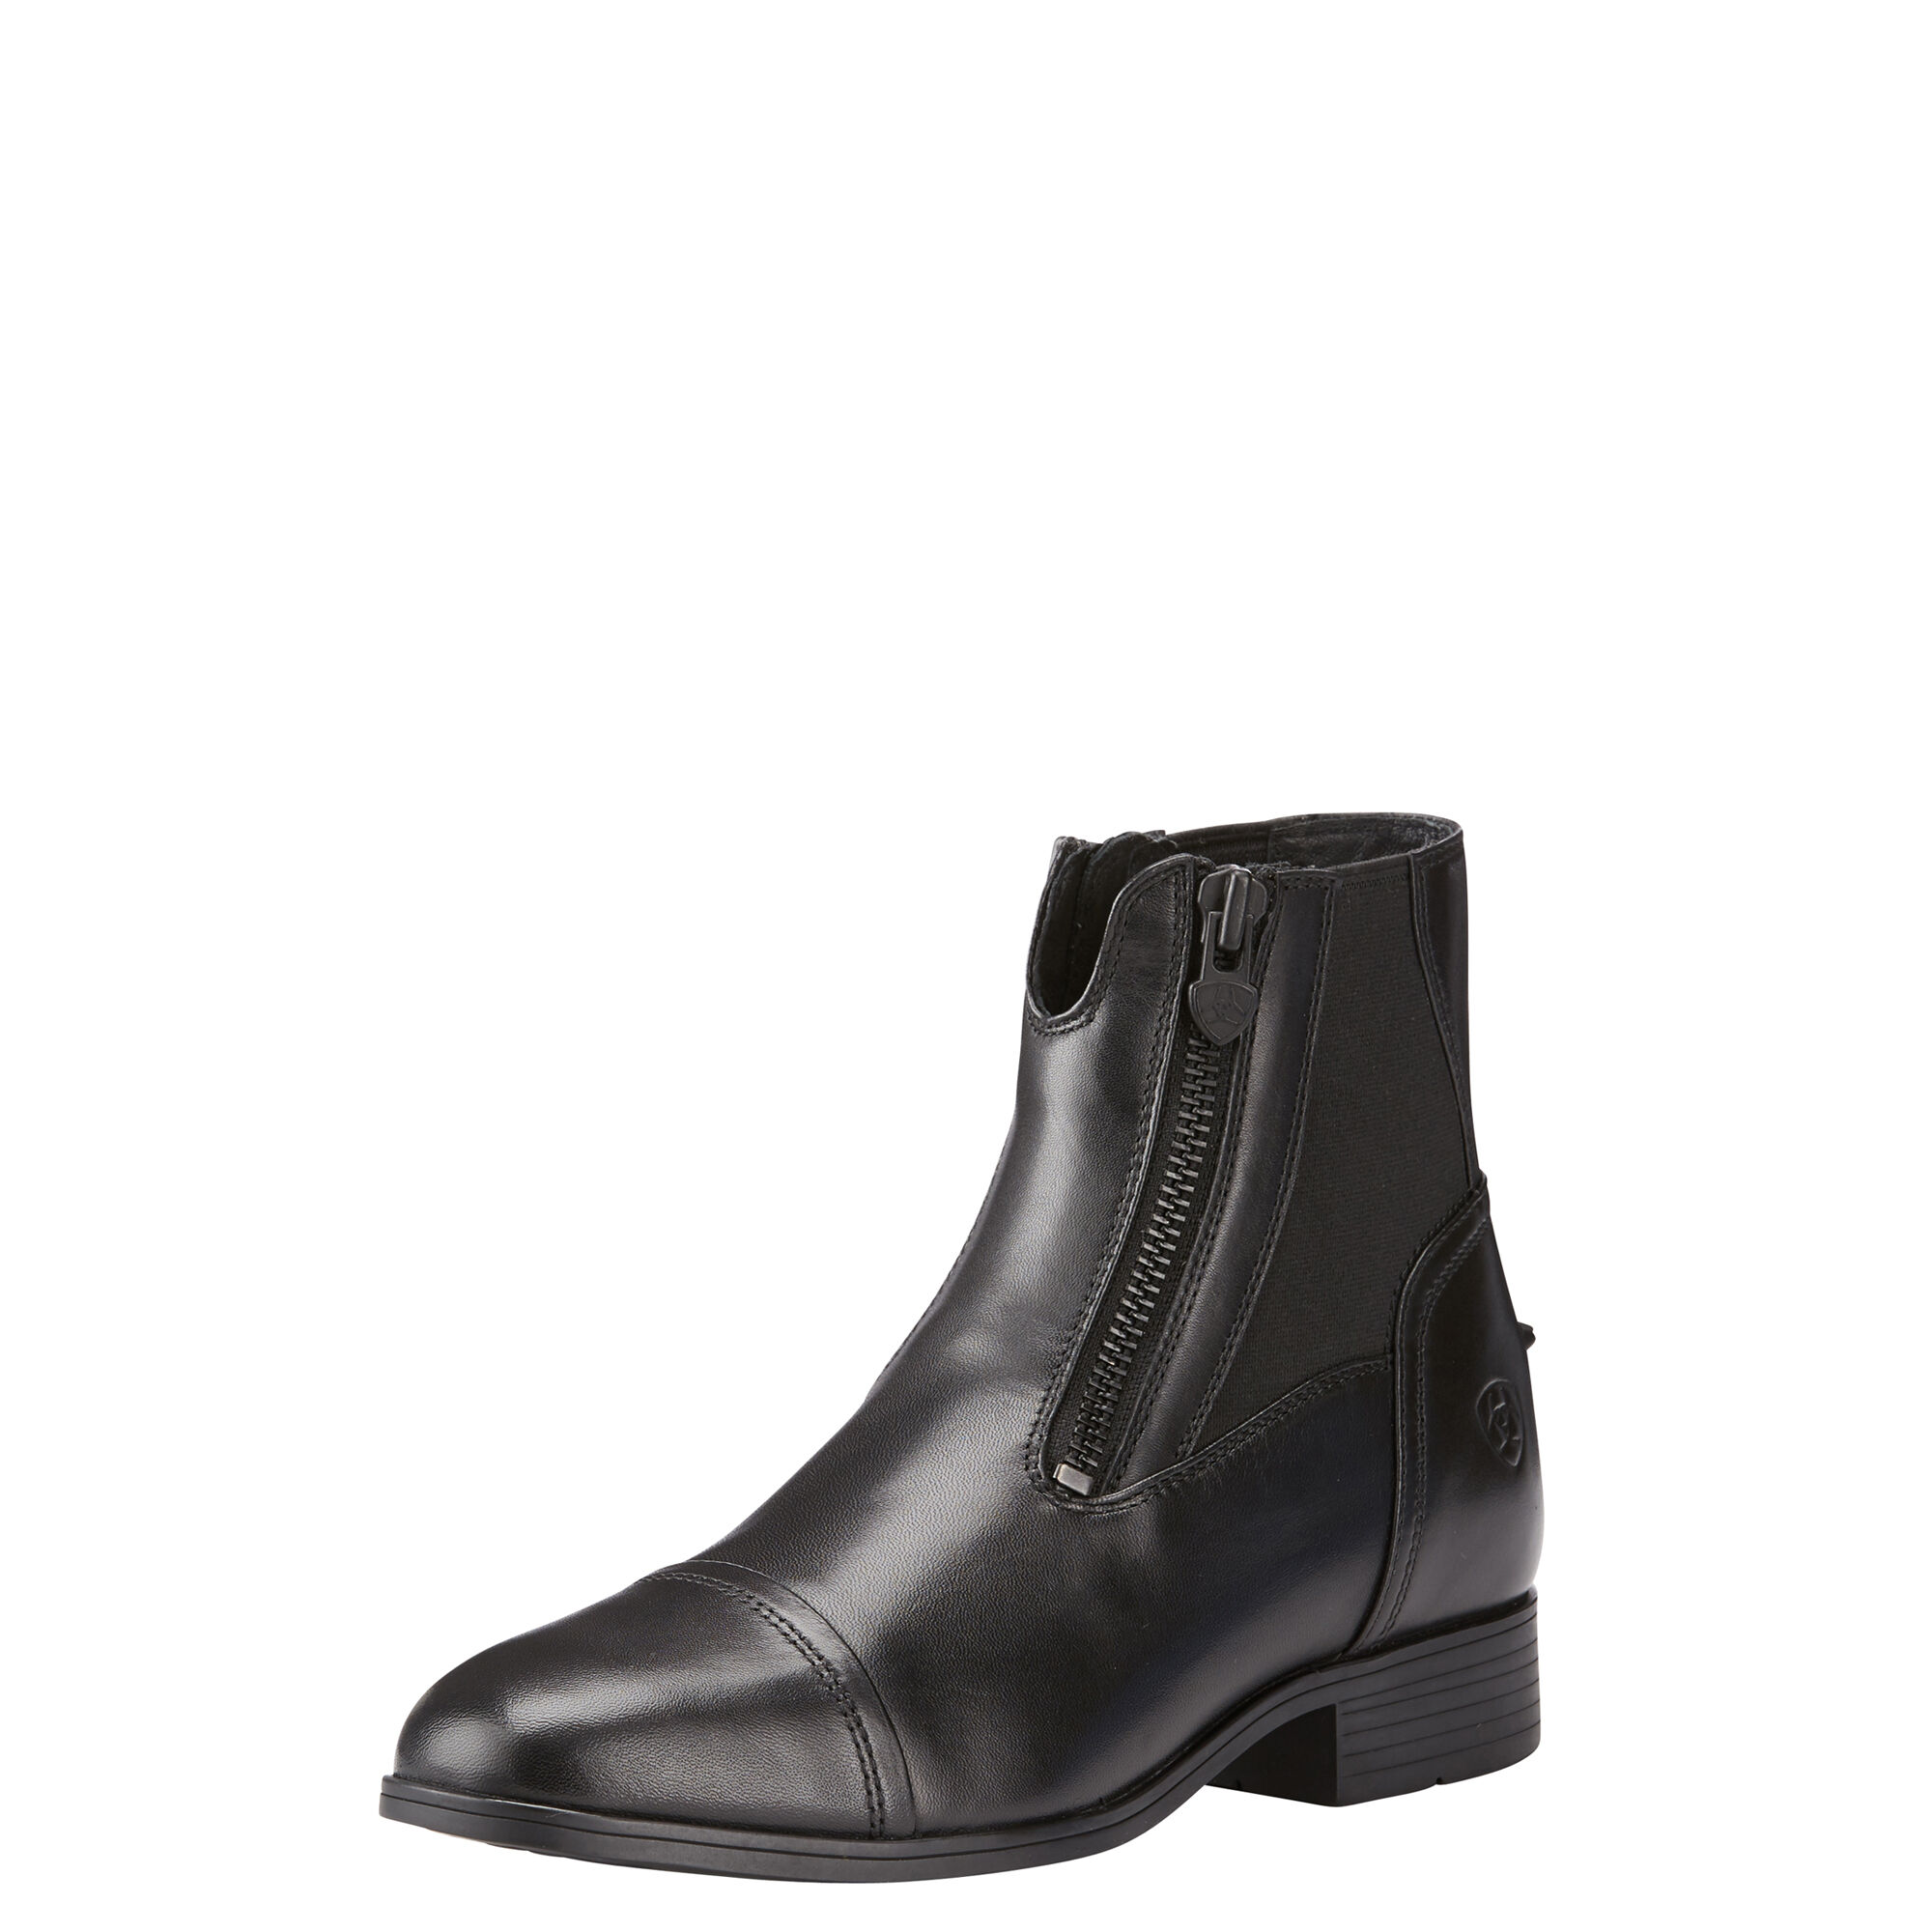 Women's Kendron Pro Paddock Boots in Black Leather  by Ariat